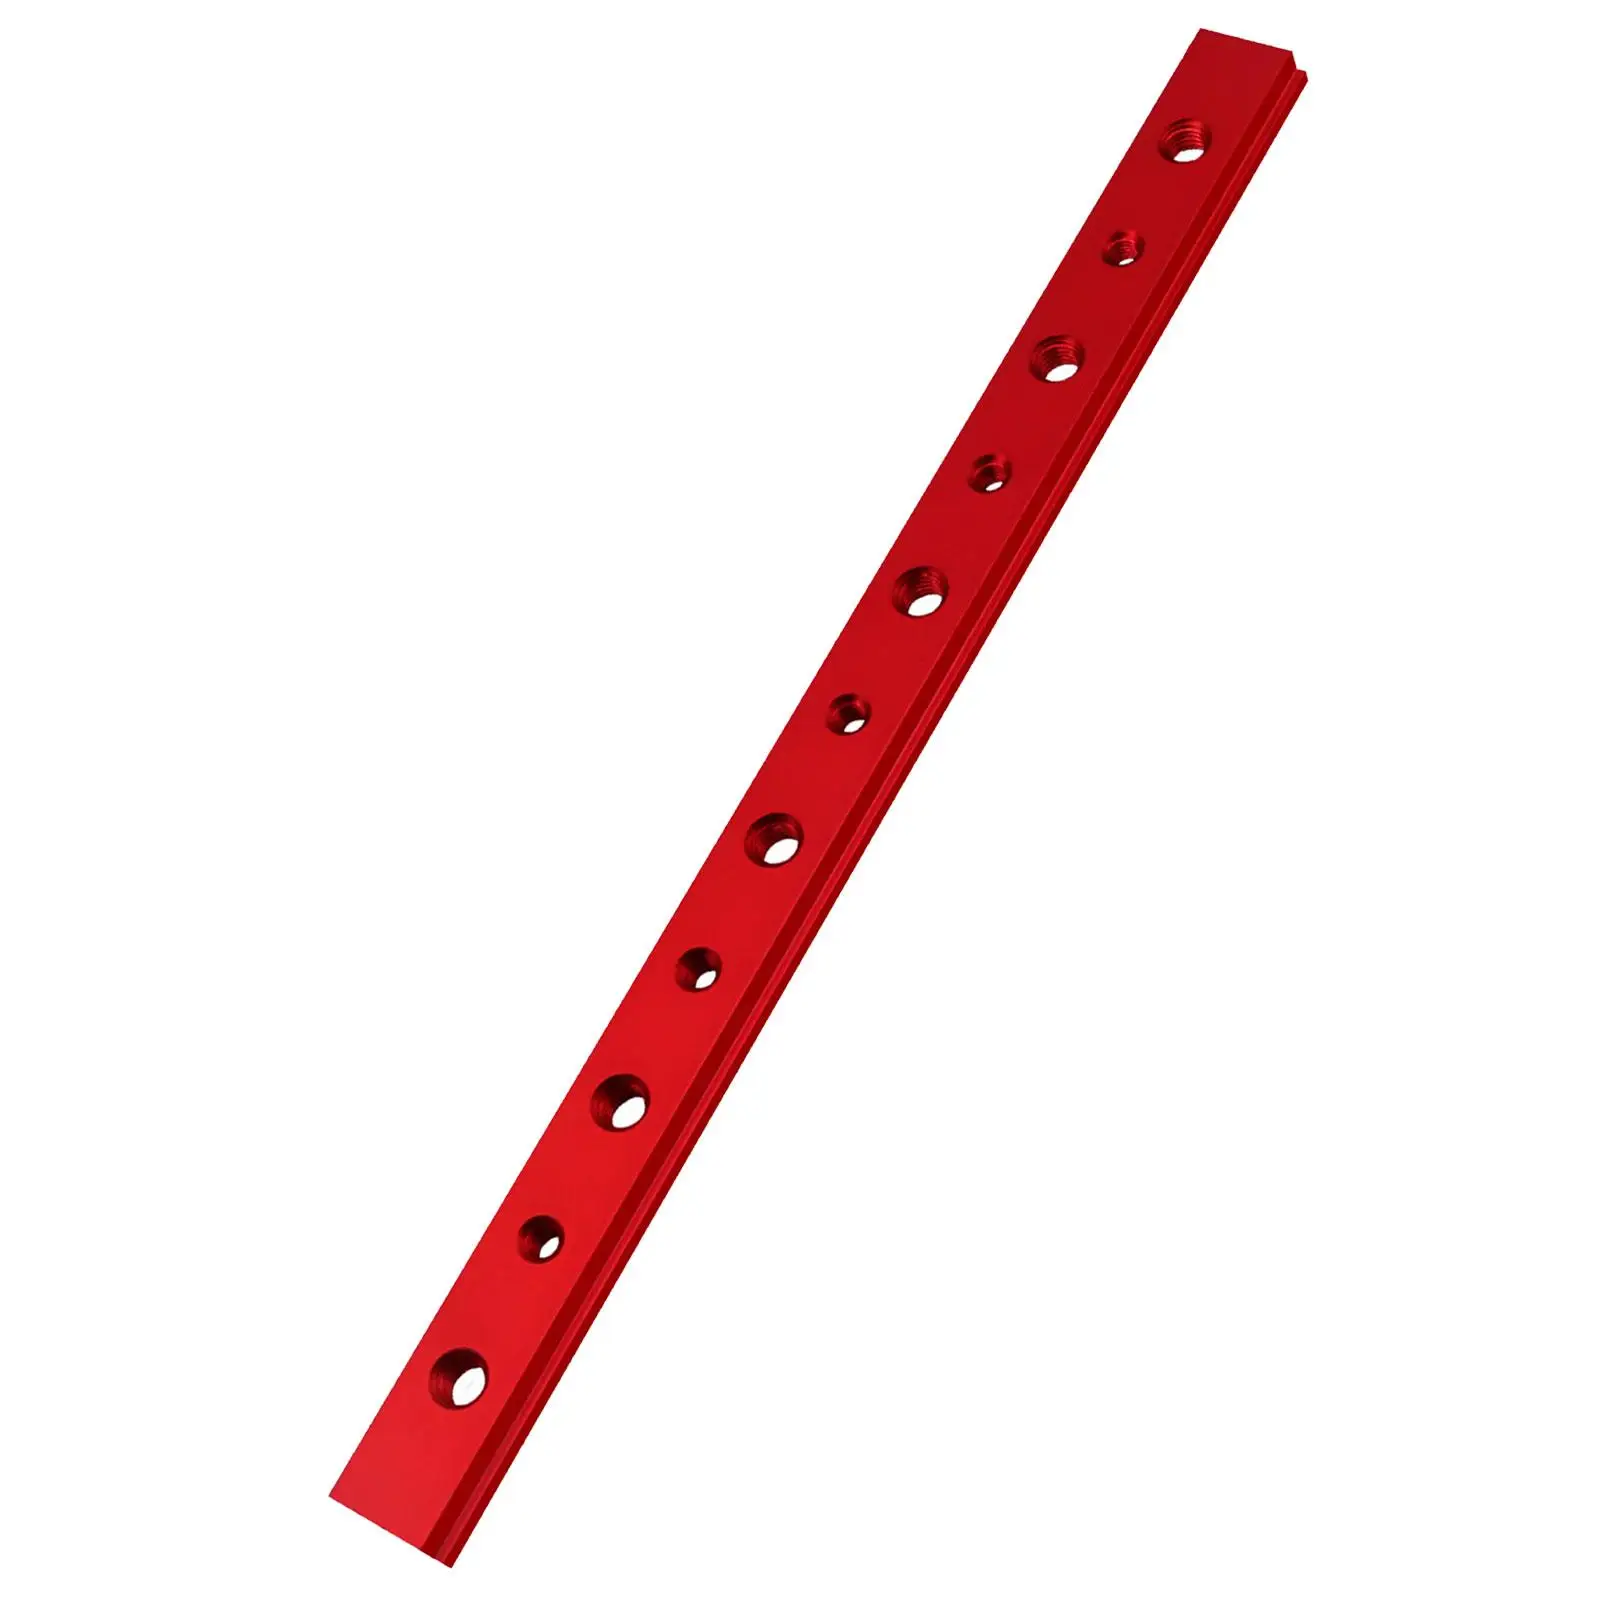 Aluminium Alloy Miter Bar Durable Perfect Sliding Action Woodworking Tool Adjustable 300mm / 11.81`` Table Saw Gauge Rod